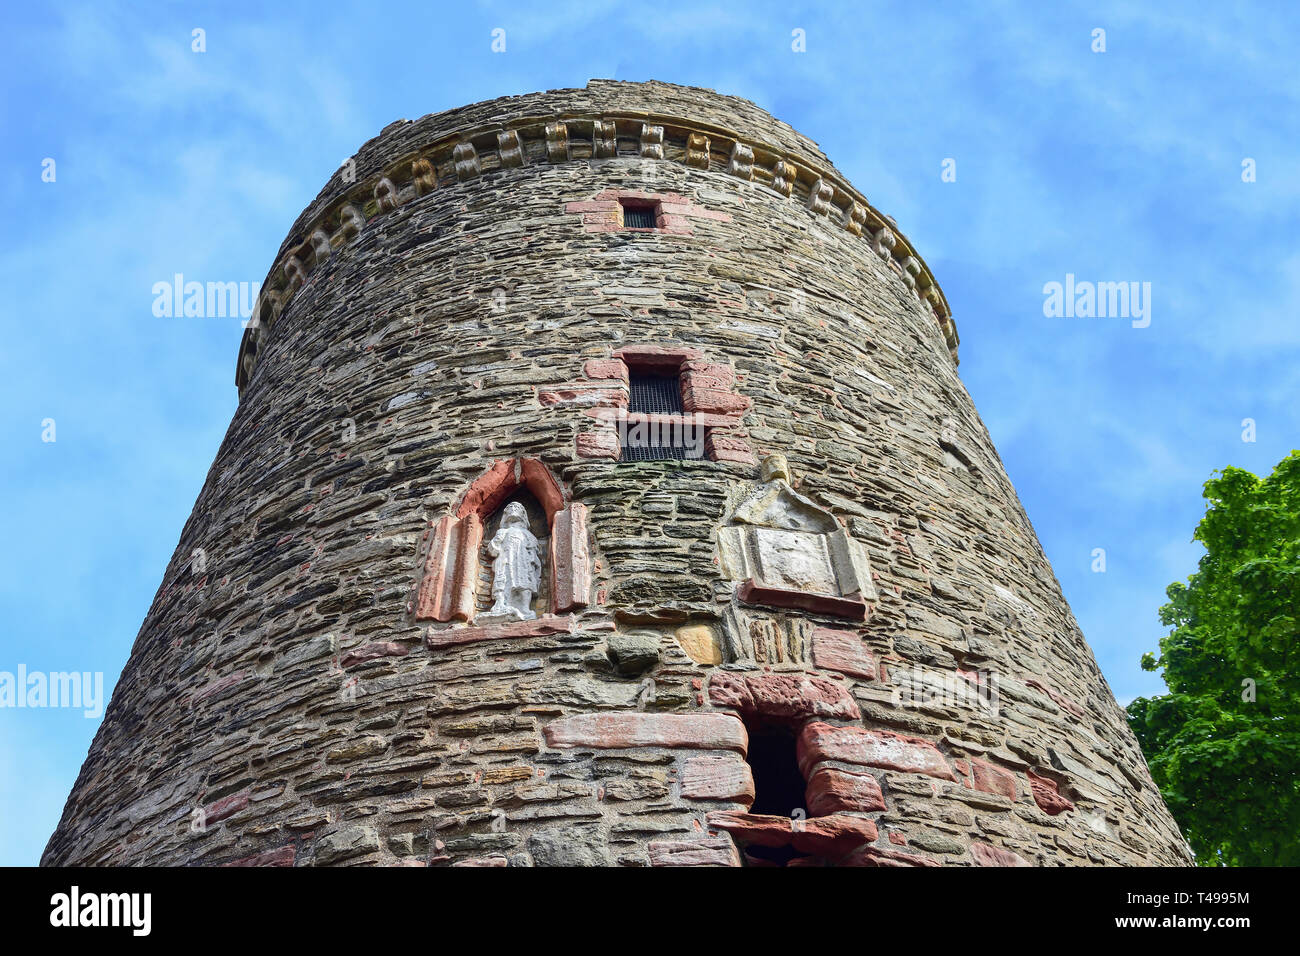 17th century tower of The Earl's Palace, Watergate, Kirkwall, The Mainland, Orkney Islands, Northern Isles, Scotland, United Kingdom Stock Photo